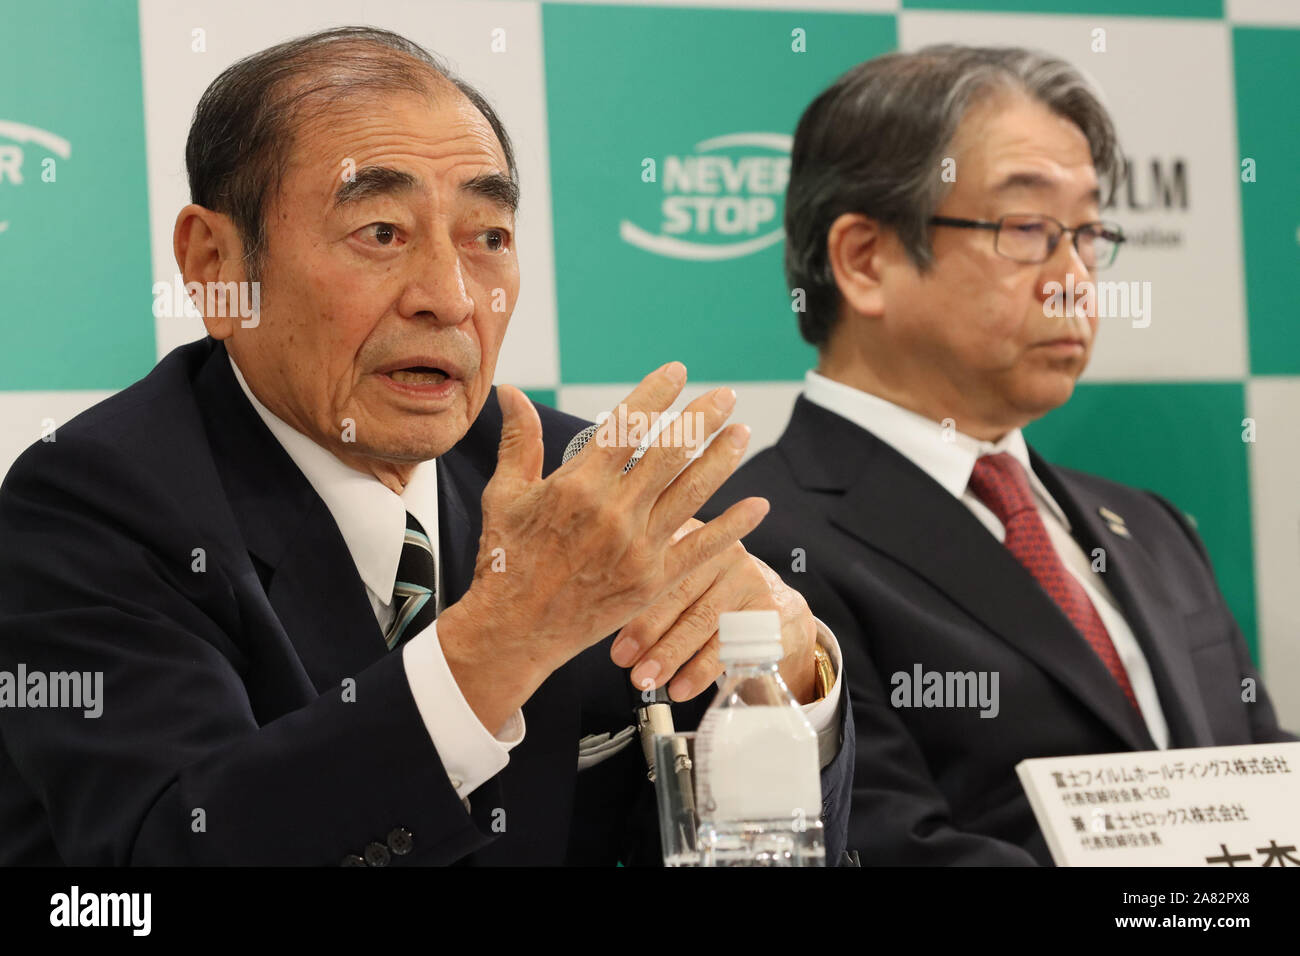 Tokyo, Japan. 5th Nov, 2019. Japan's Fujifilm Holdings chairman and CEO Shigetaka Komori announces Fujifilm will acquire 25% stake in Fuji Xerox owned by Xerox and Fujifilm's ownership of Fuji Xerox to 100% while president and COO Kenji Sukeno (R) looks on at a press conference in Tokyo on Tuesday, November 5, 2019. Fujifilm Holdings gave up a plan to purchase Xerox Corp in the United States. Credit: Yoshio Tsunoda/AFLO/Alamy Live News Stock Photo